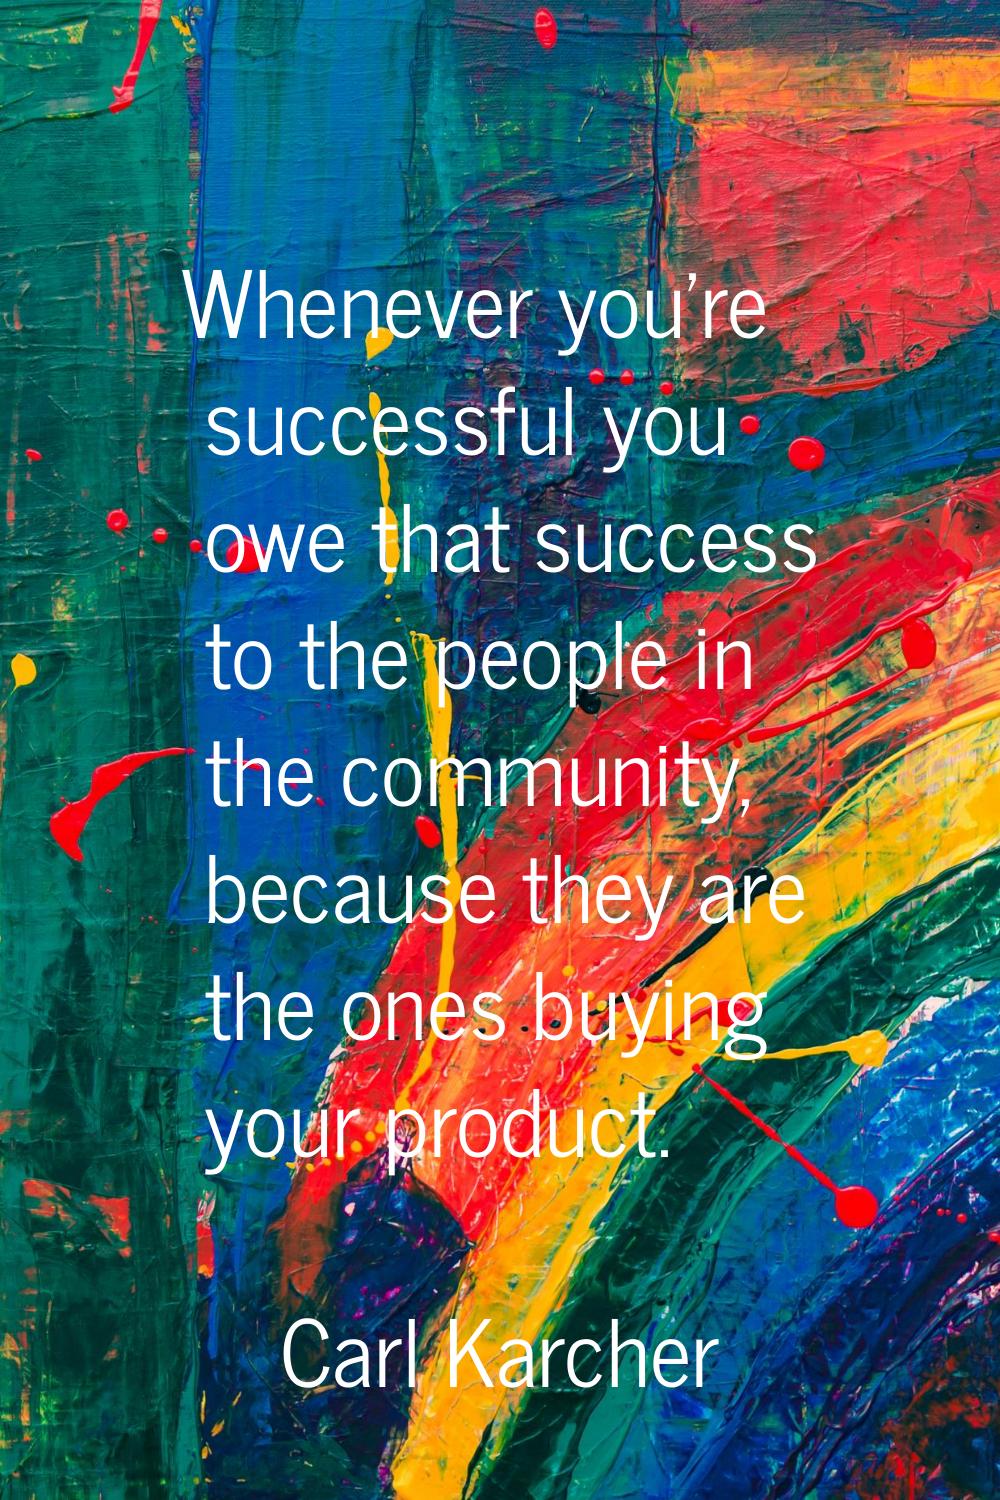 Whenever you're successful you owe that success to the people in the community, because they are th